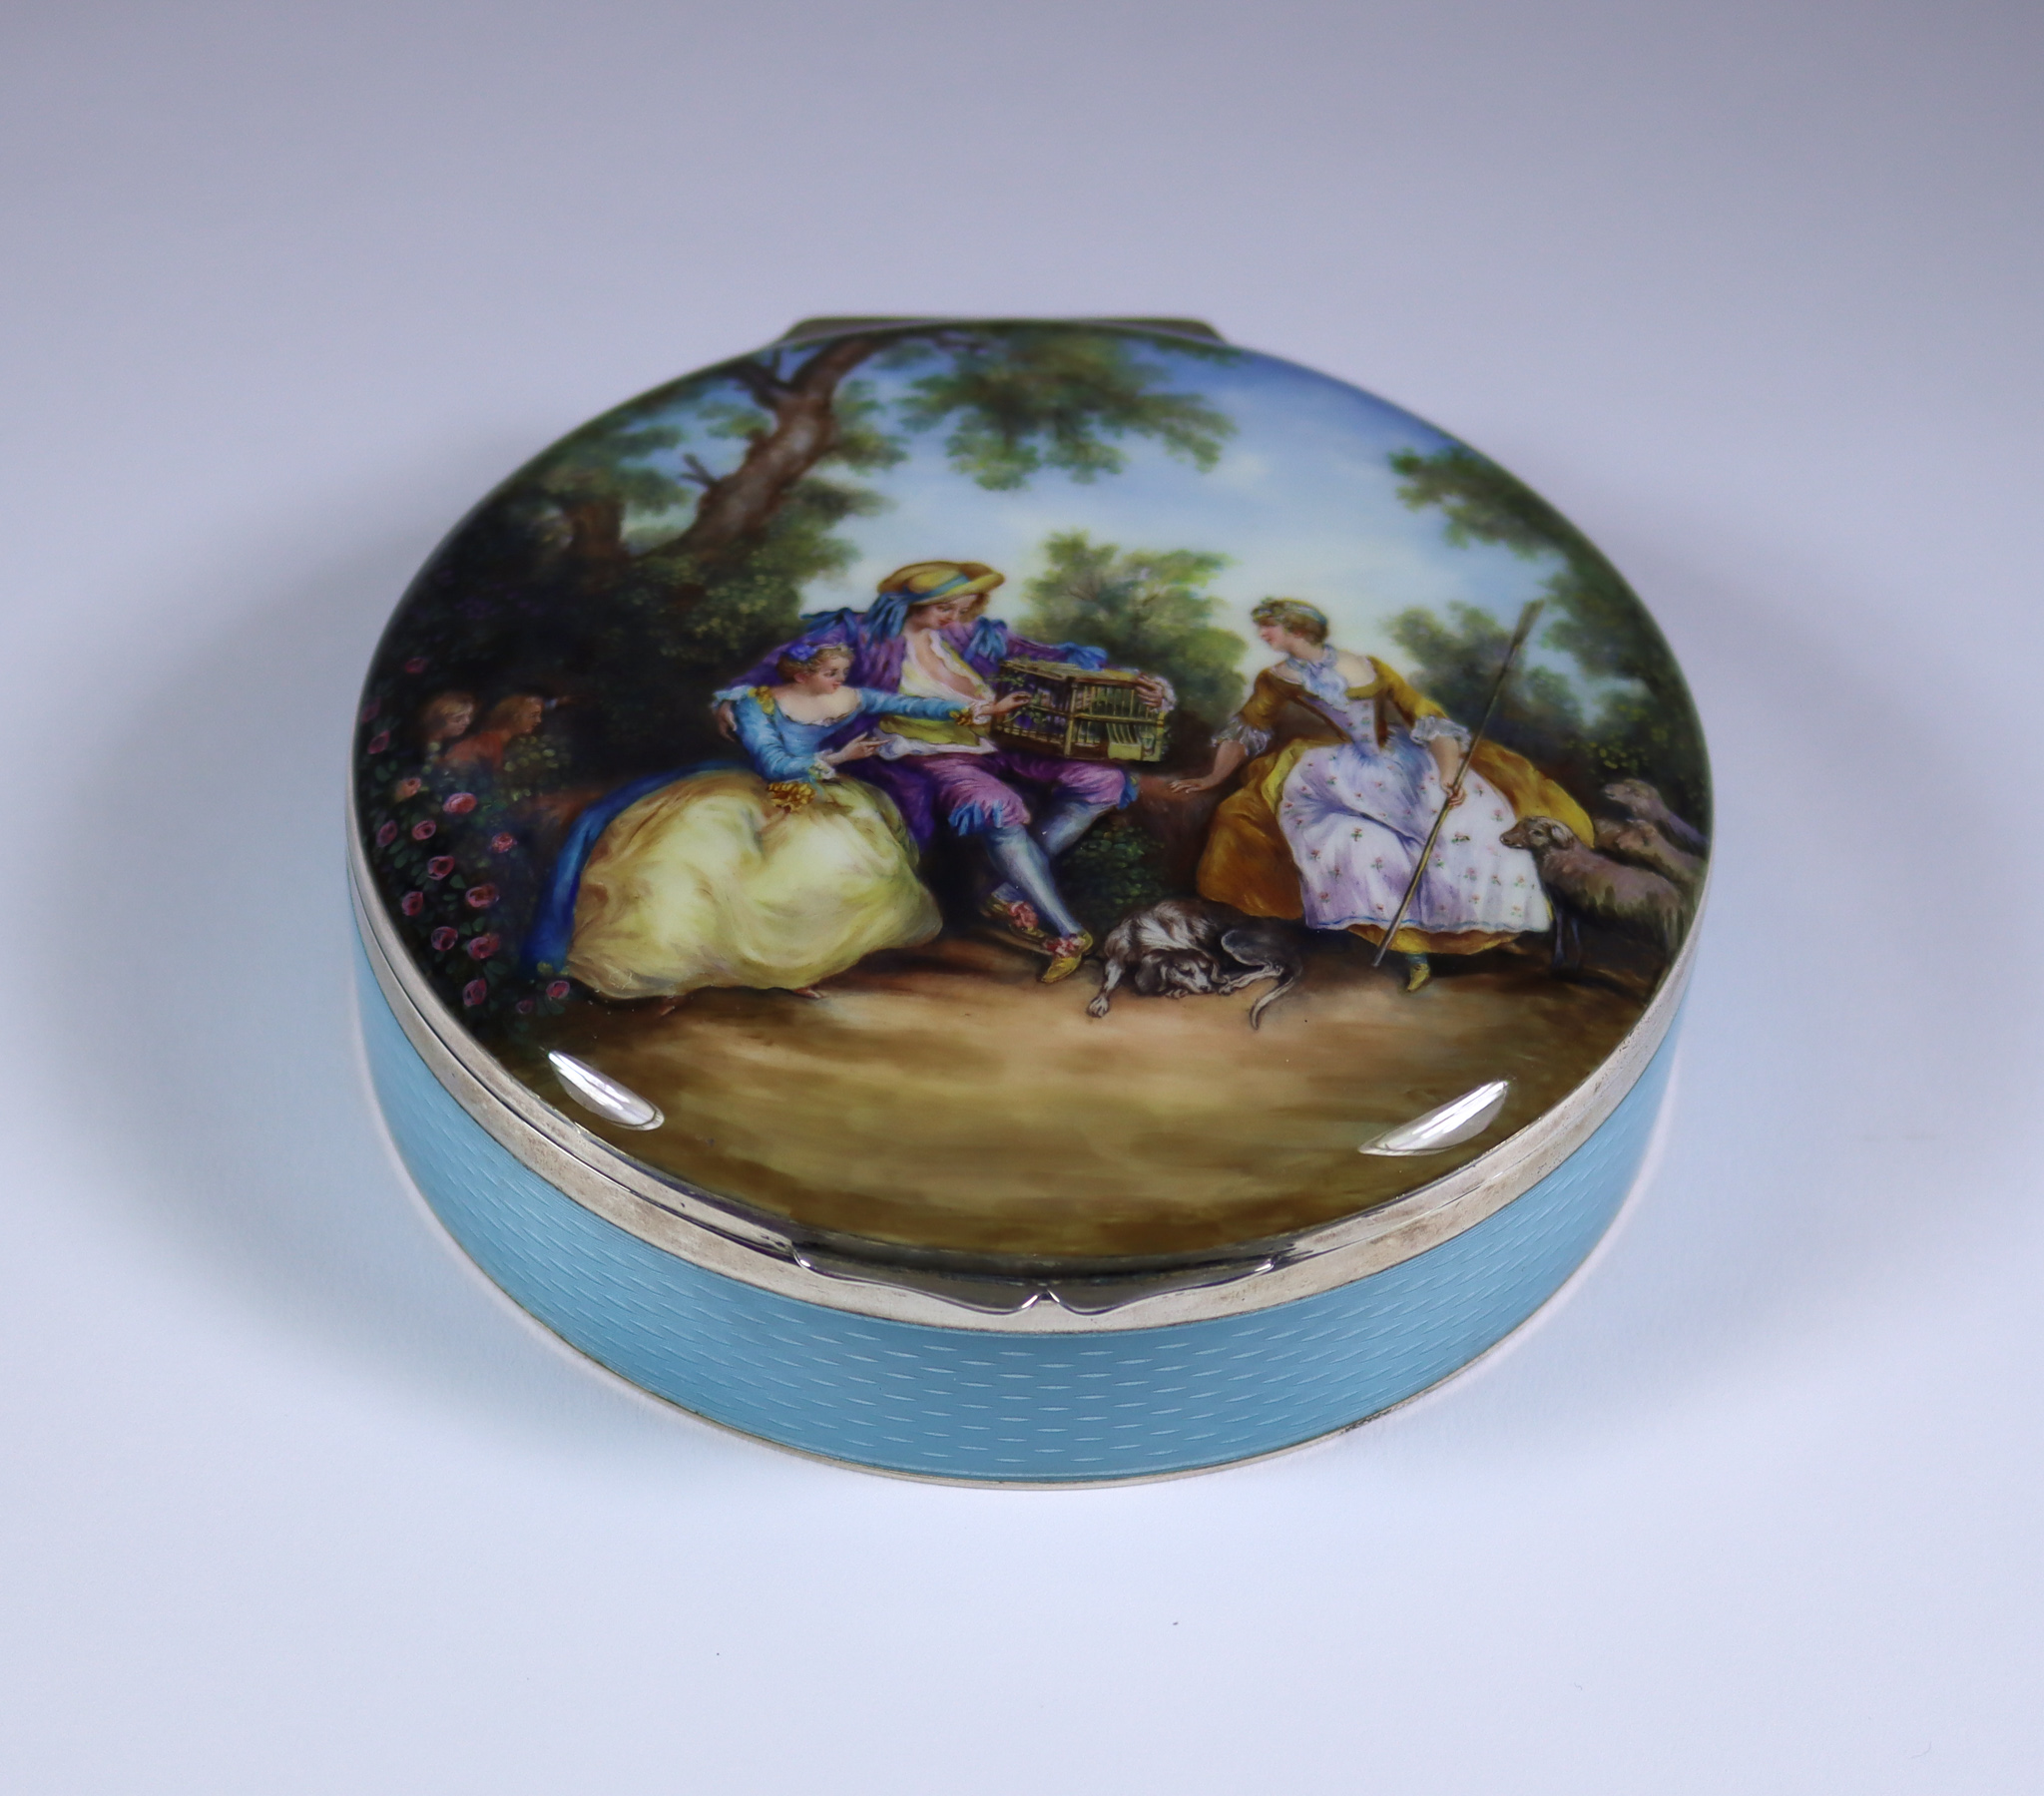 An Early 20th Century Continental Silver Gilt and Enamel Circular Box, with import marks for P.H.